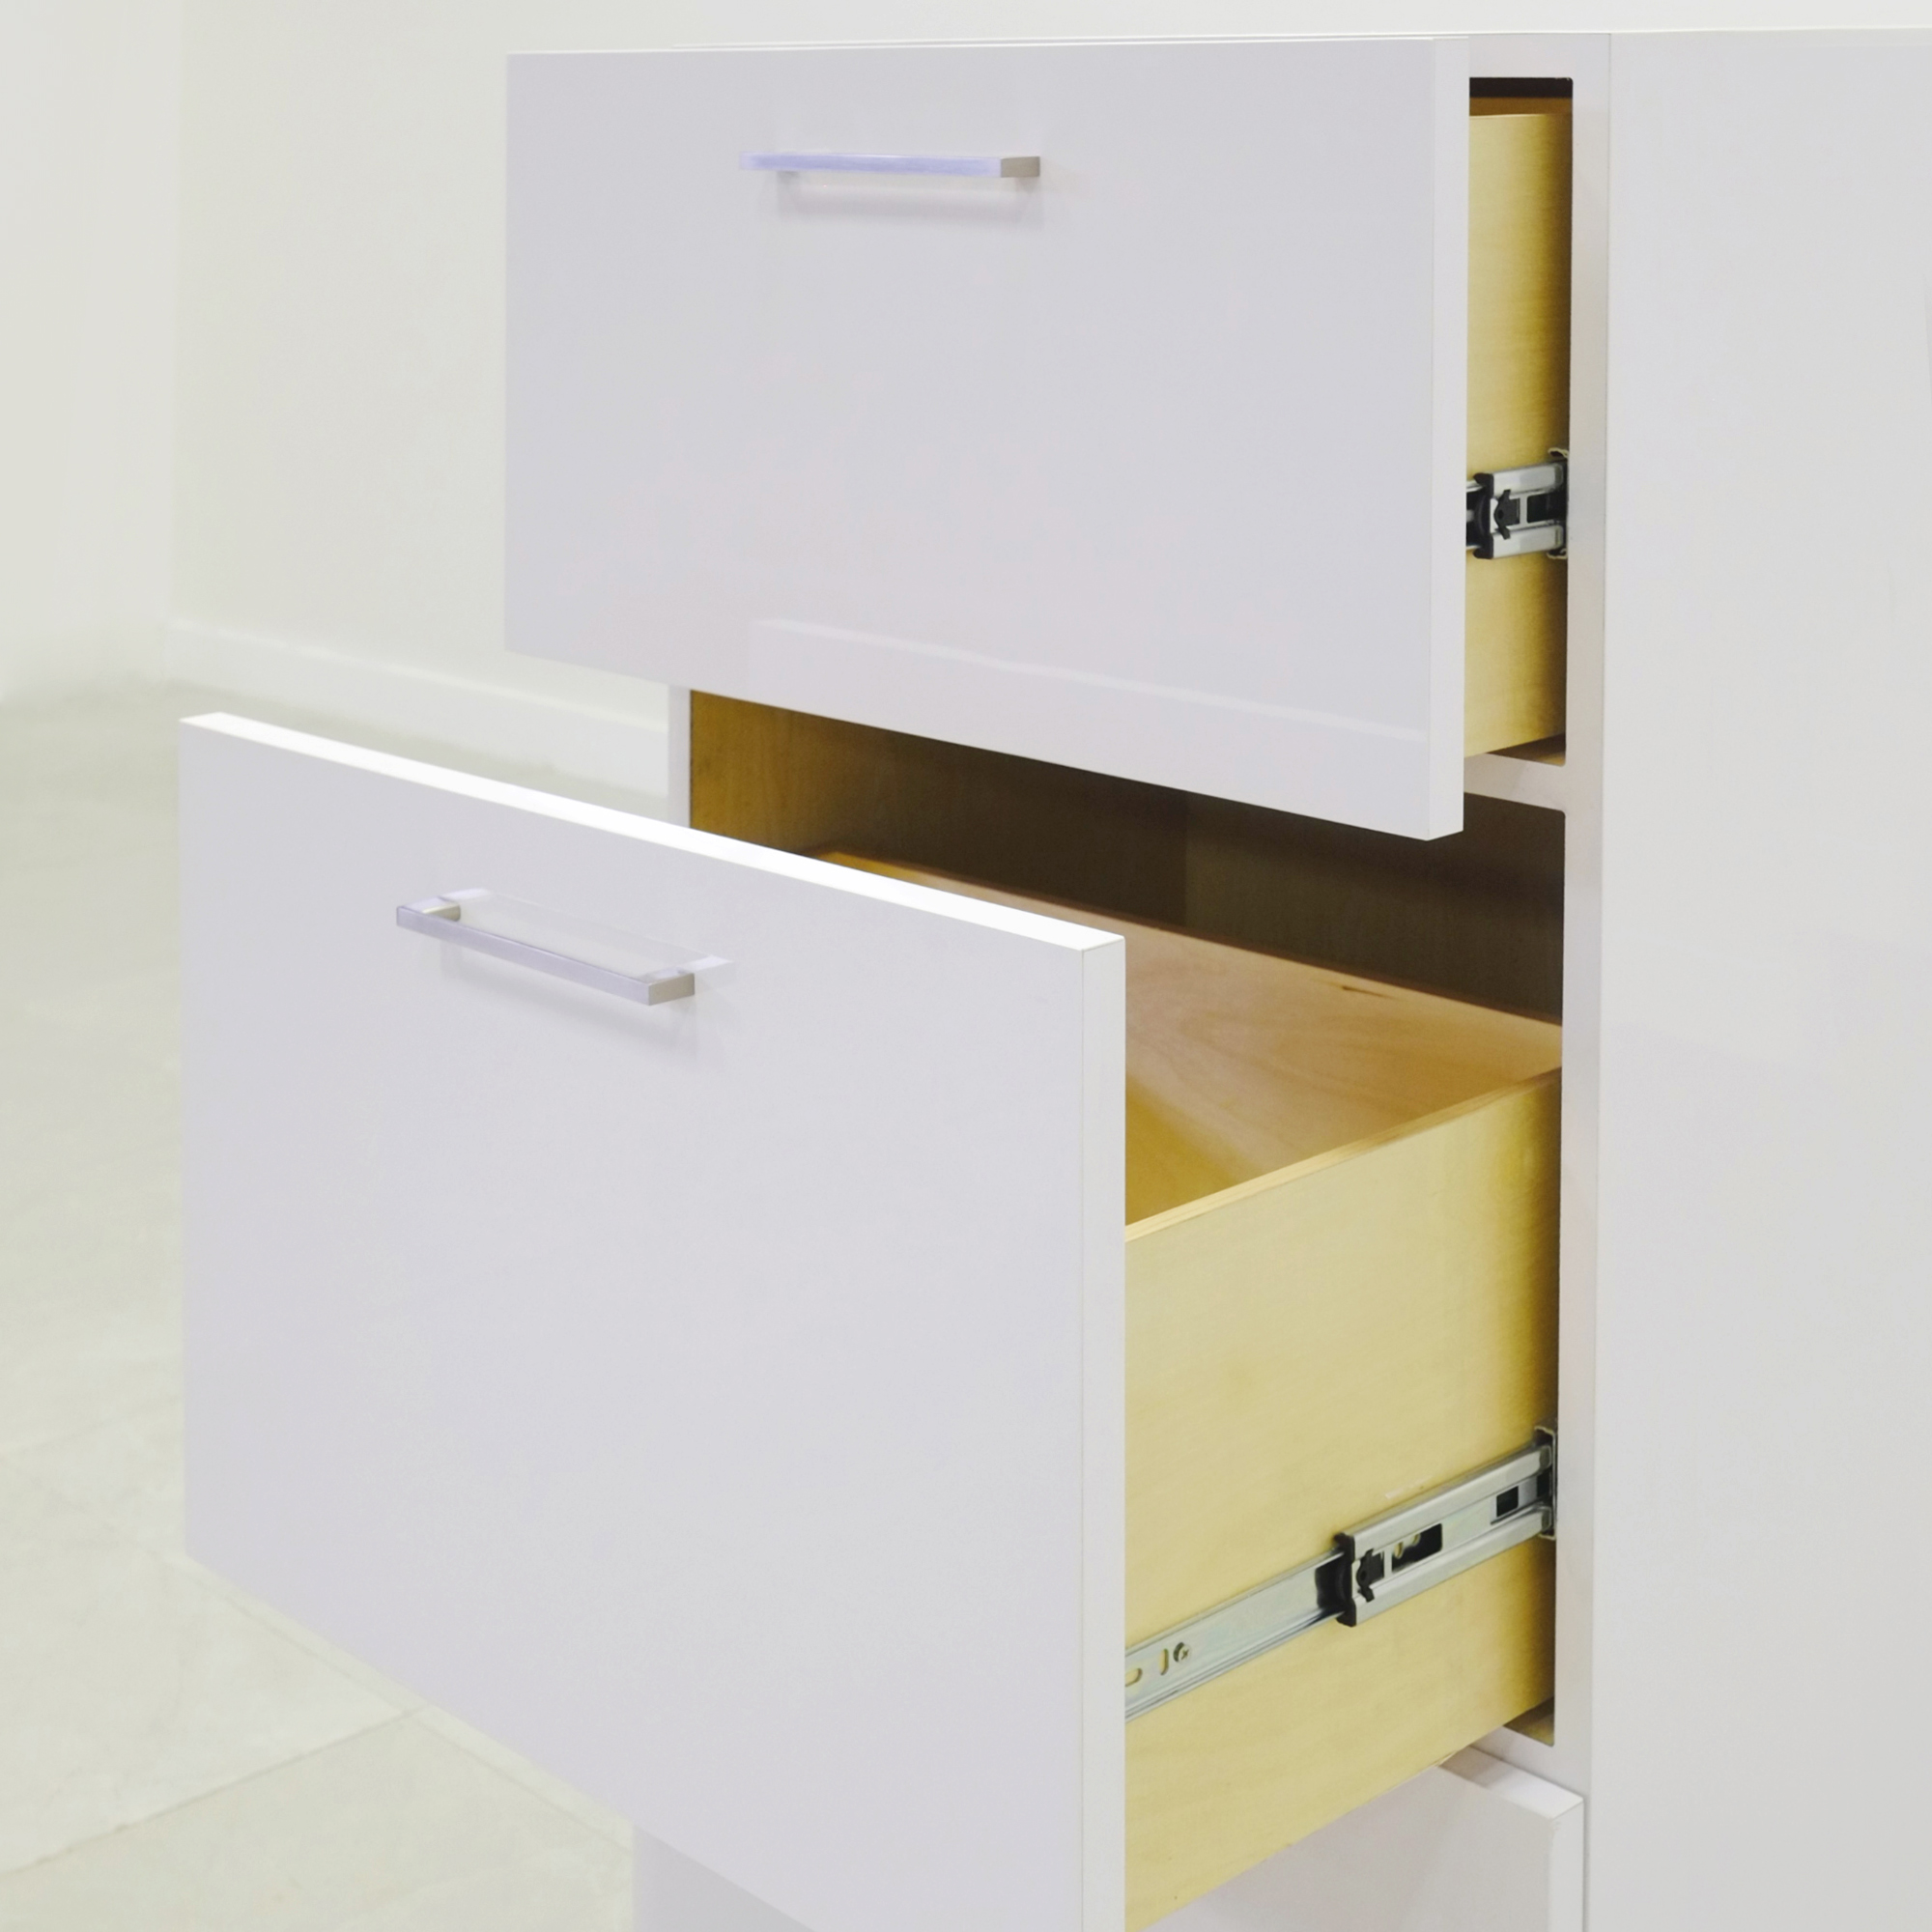 Naples Lateral File Cabinet in white gloss laminate, shown here.